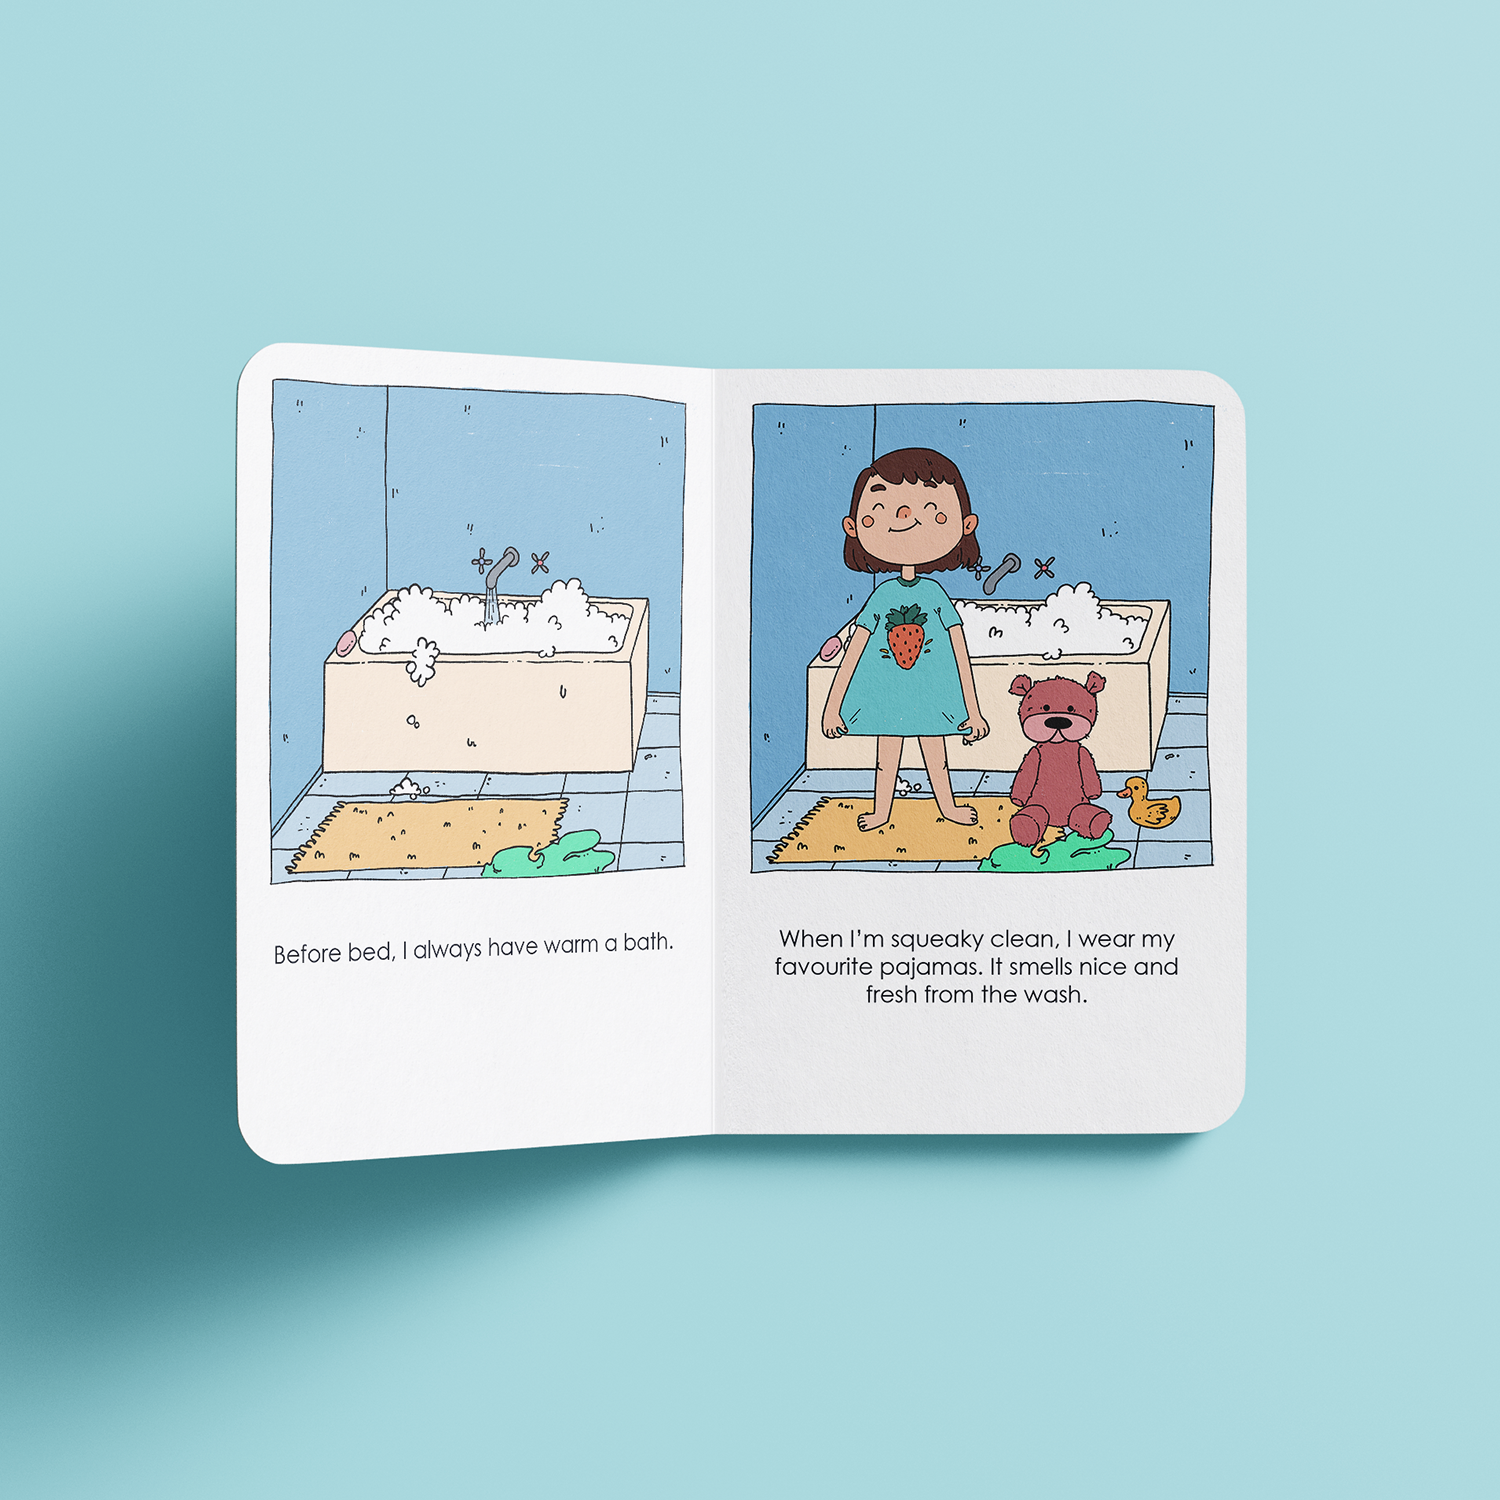 A preview of the pages inside the book. This page is about bathing before bed. 